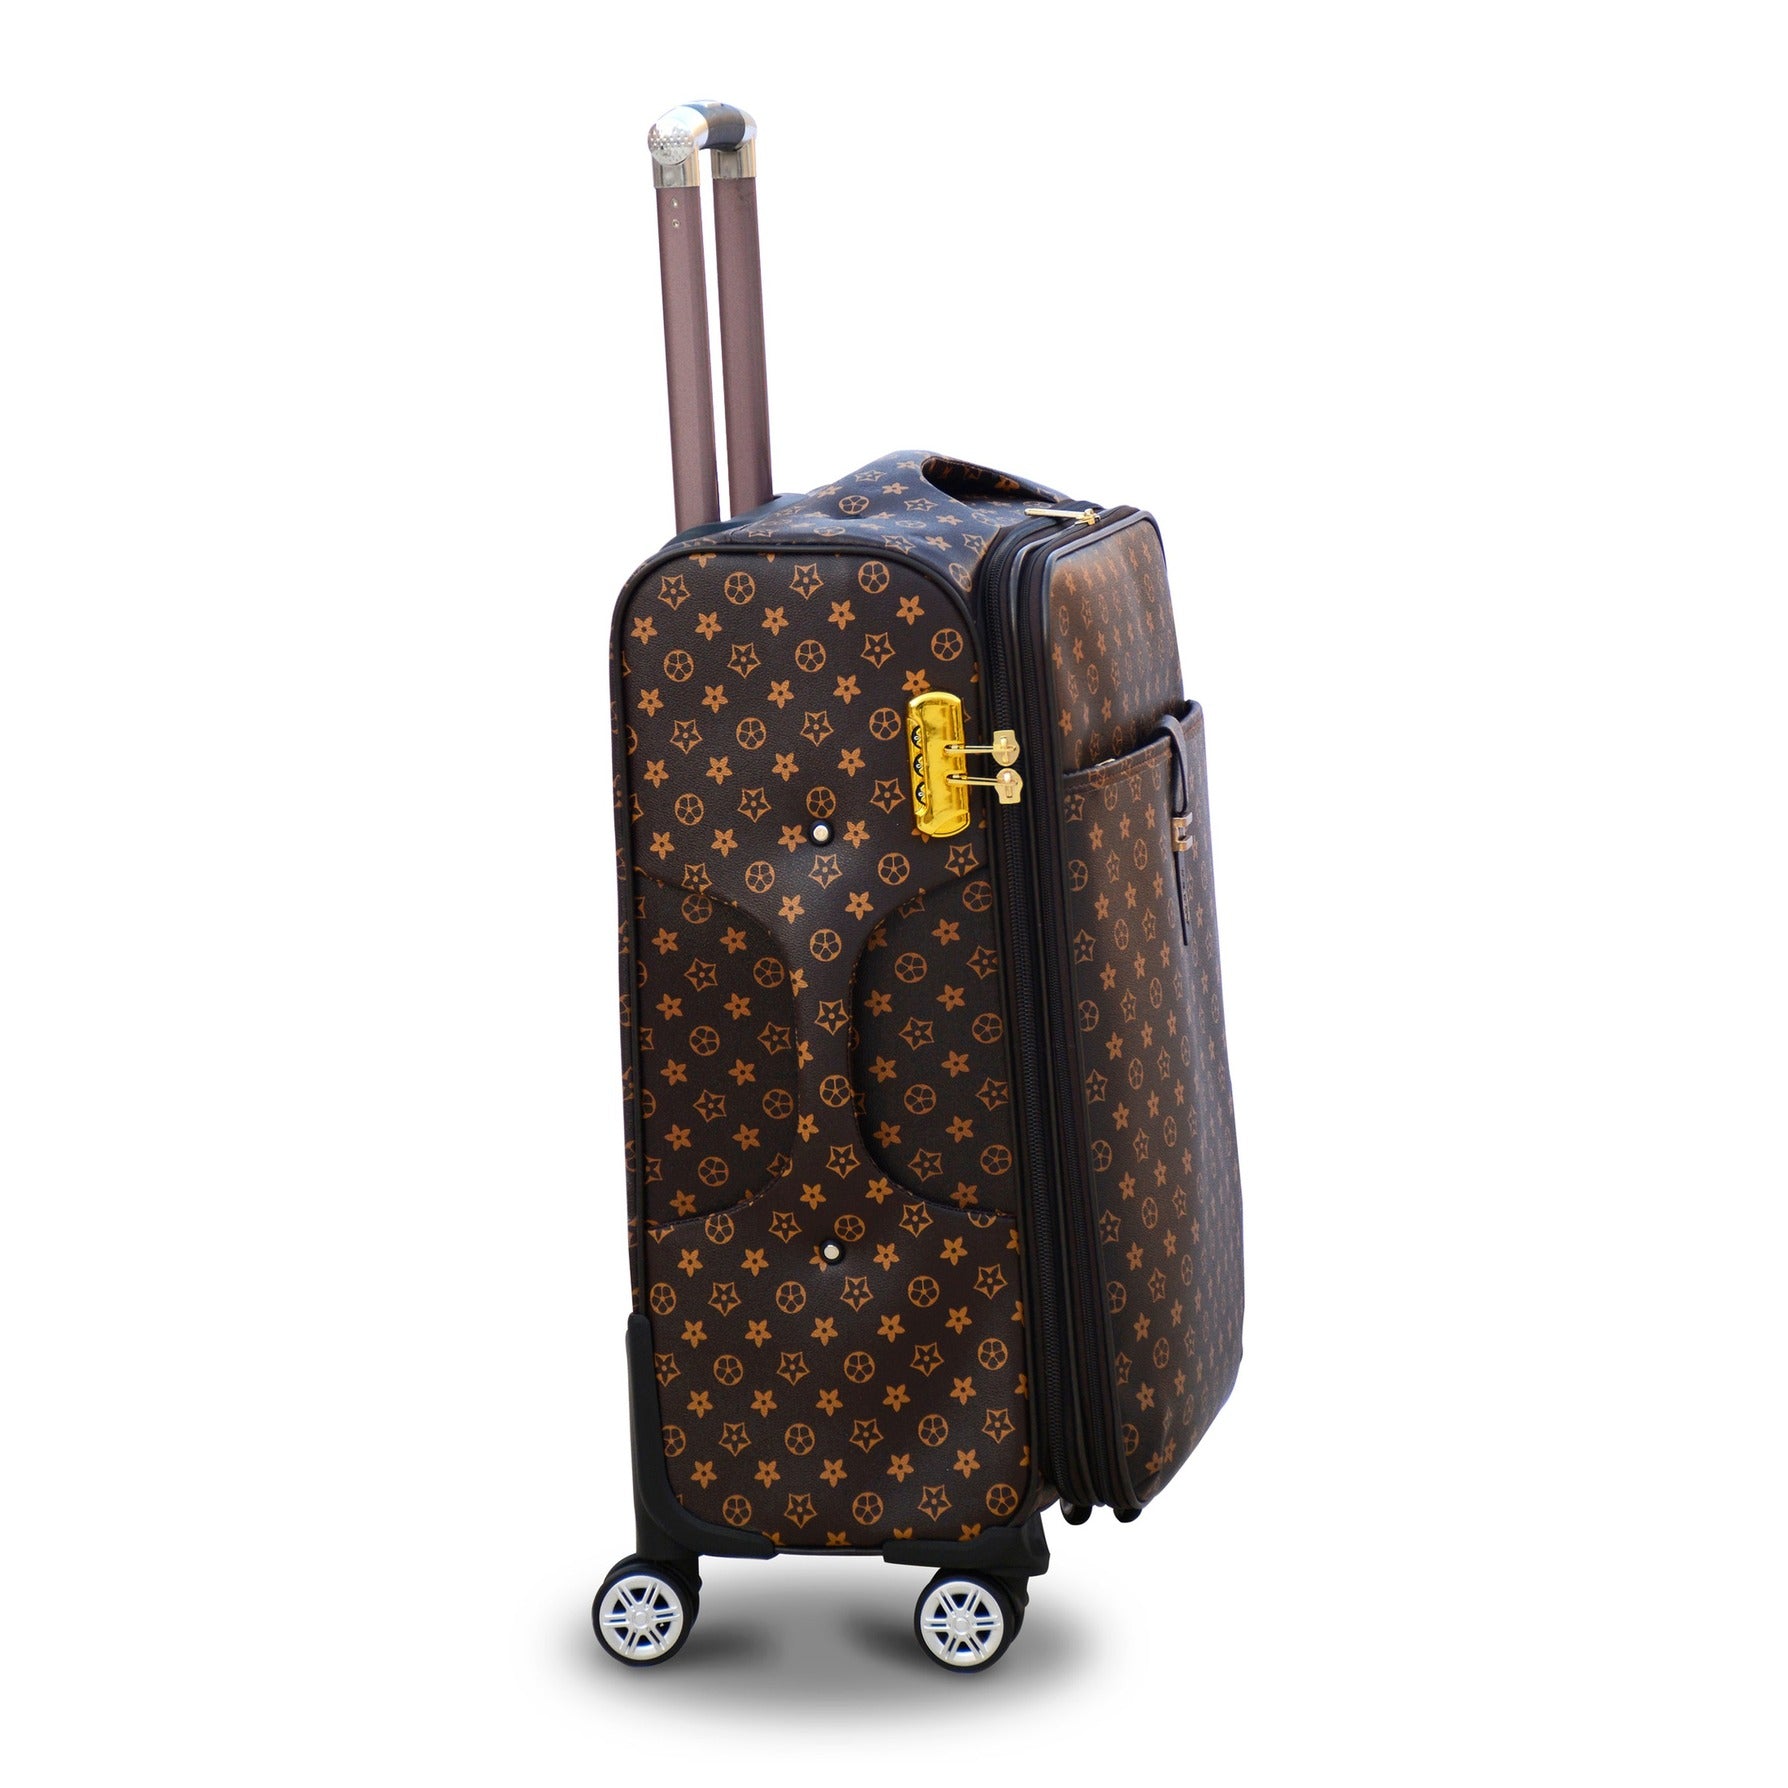 24" Brown Colour LVR PU Leather Luggage Lightweight Trolley Bag with Spinner Wheel